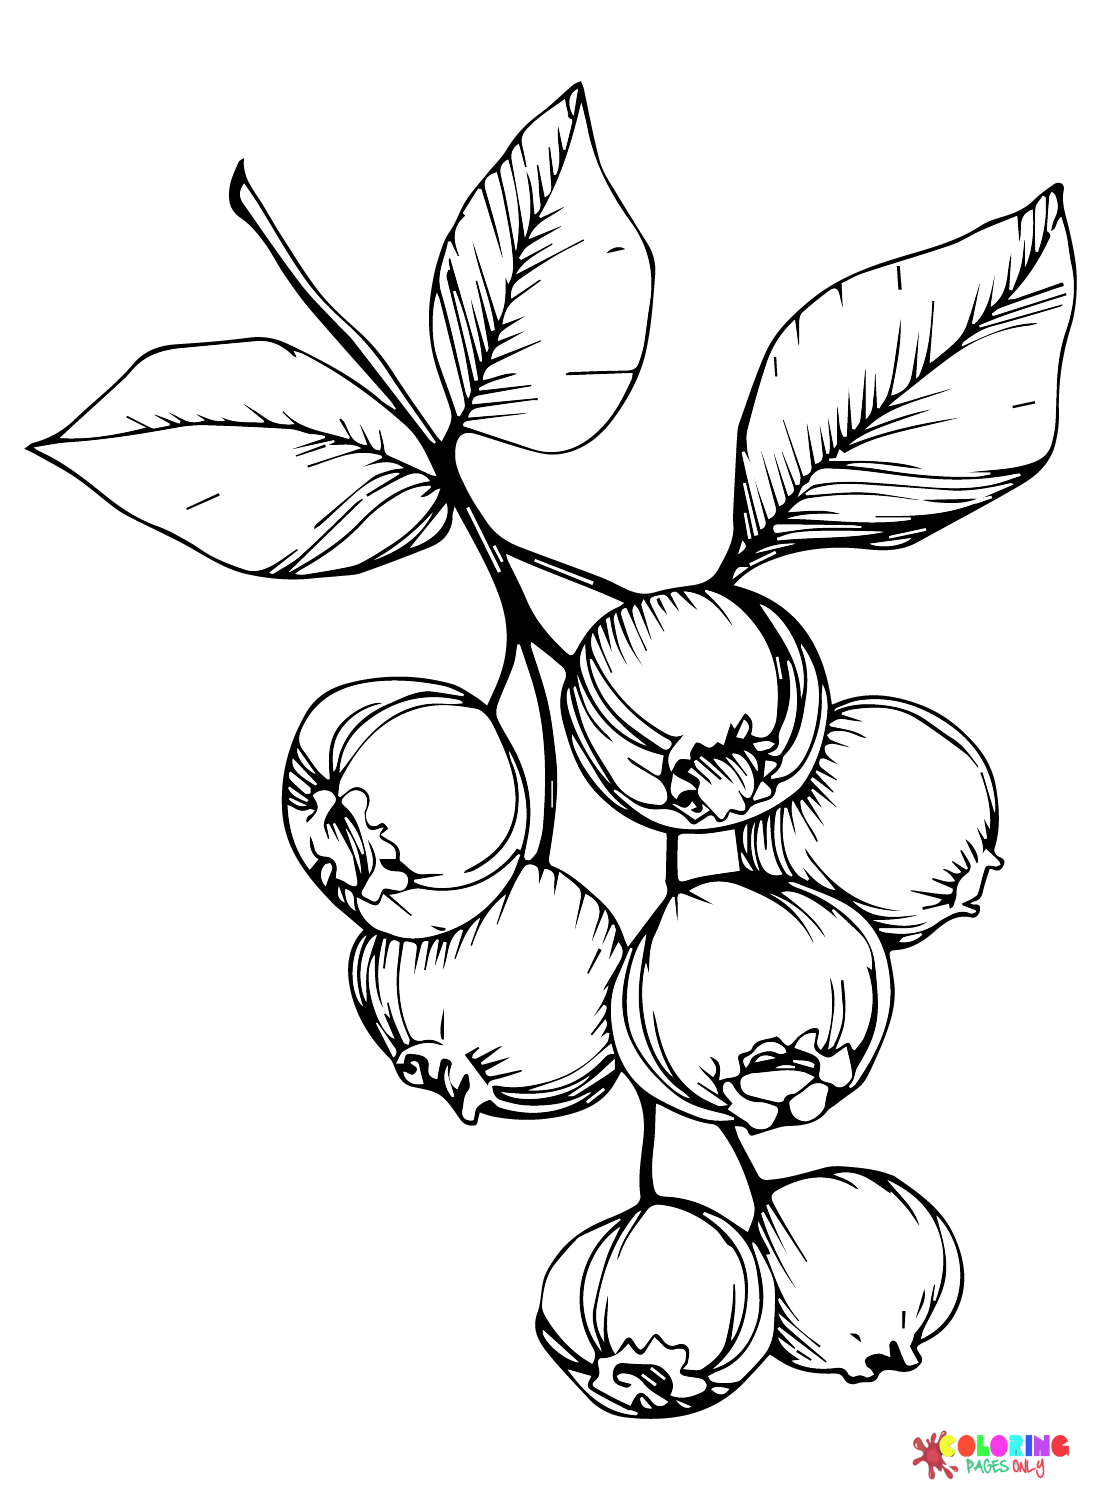 Blueberries Coloring Page